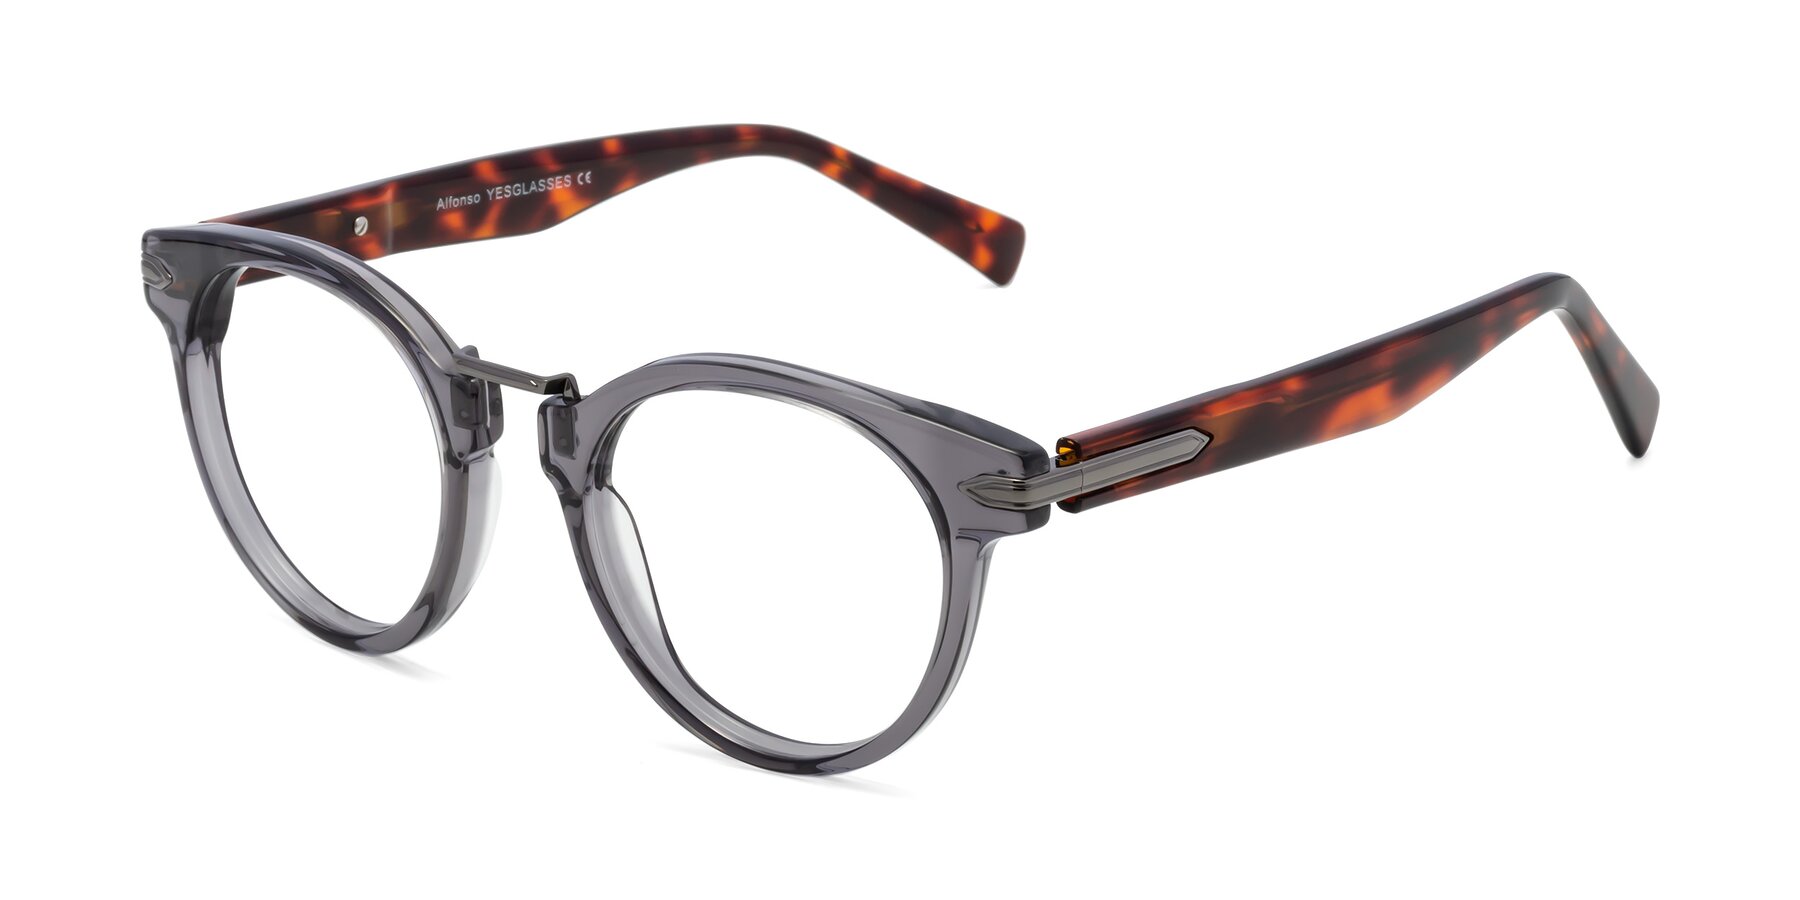 Angle of Alfonso in Gray /Tortoise with Clear Eyeglass Lenses